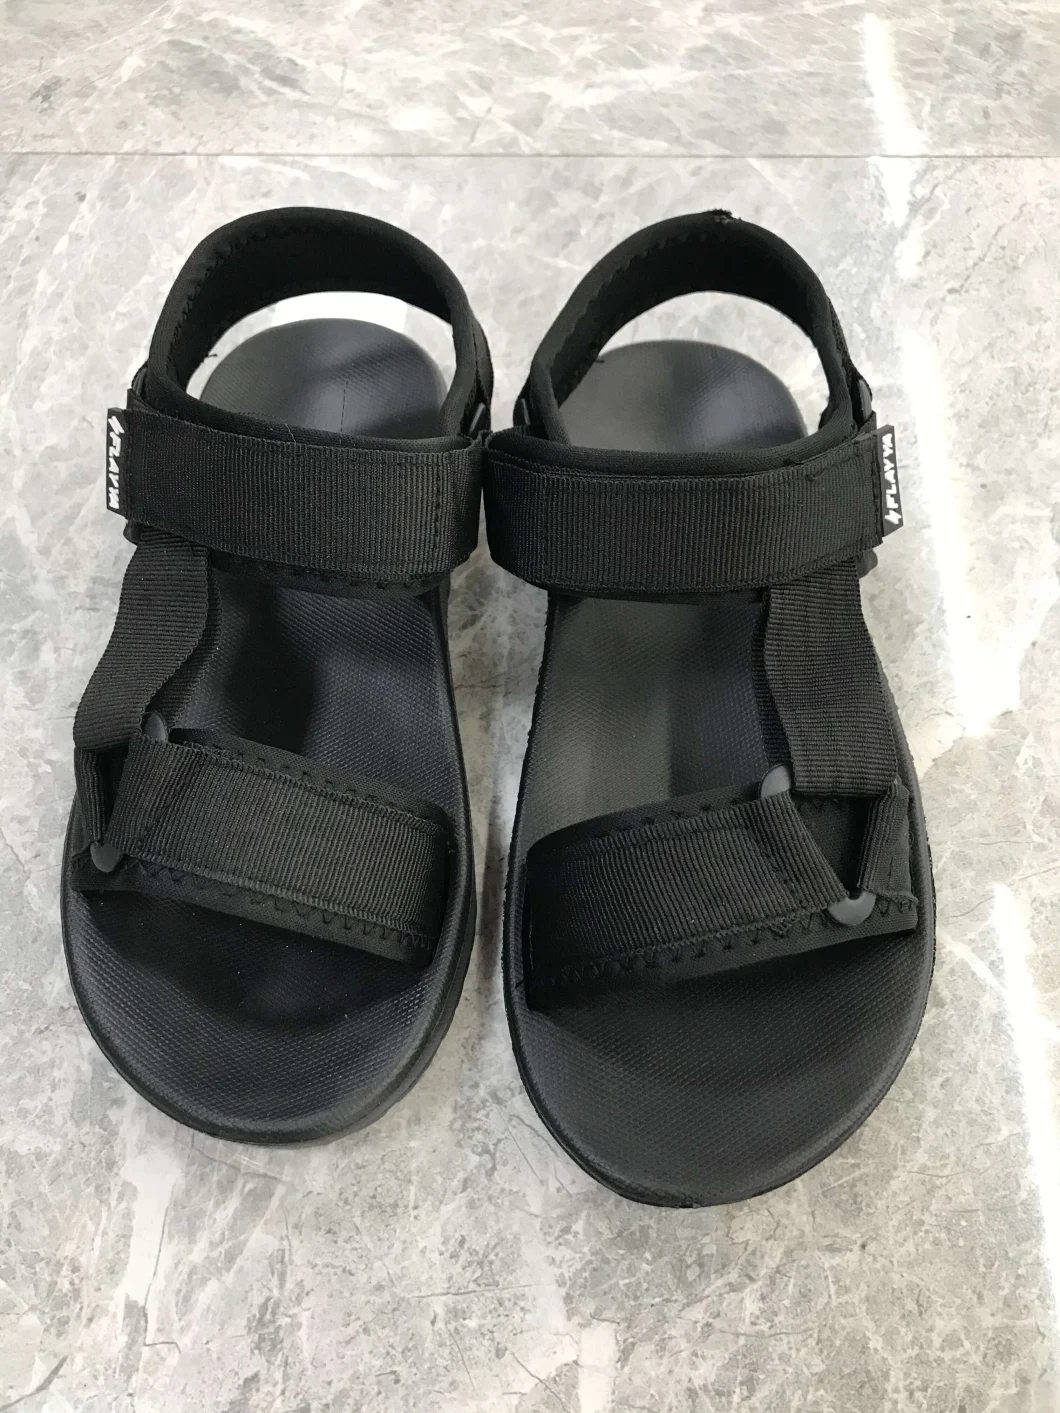 Boys Sandal EVA Injection Shoes Made in Guangdong